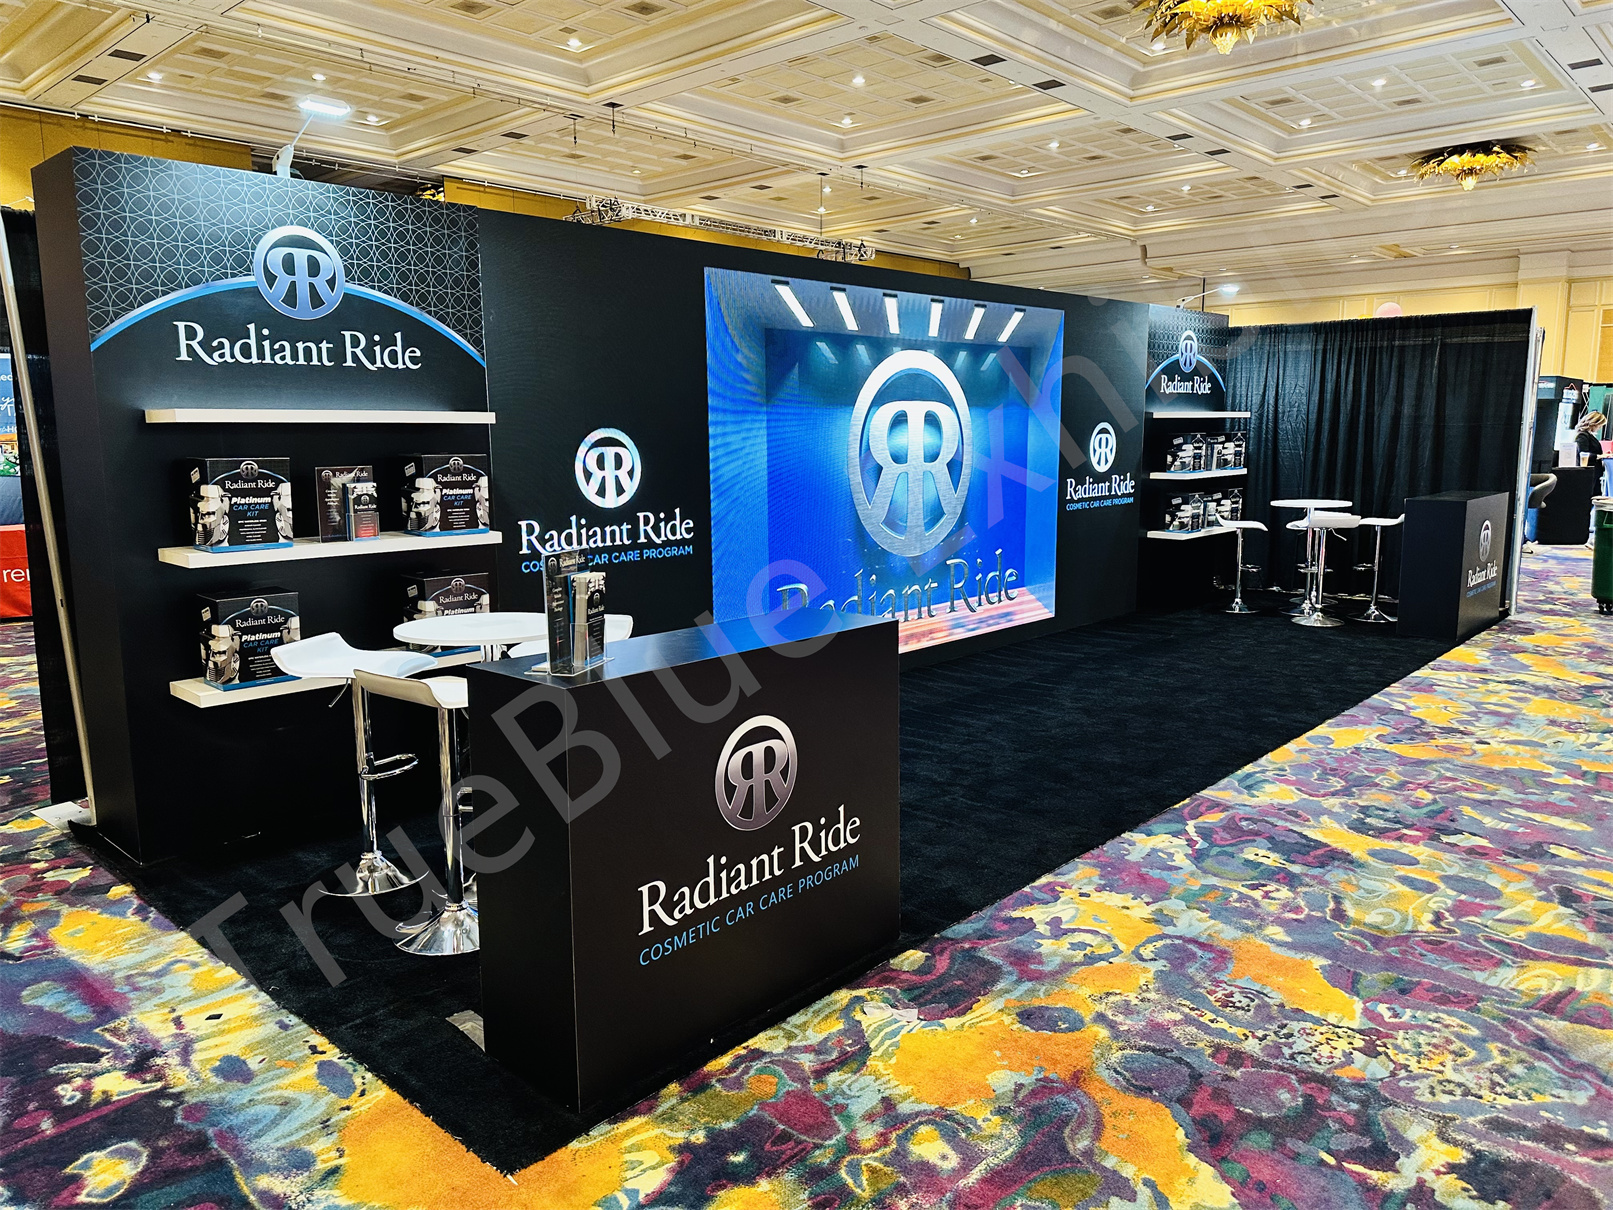 Radiant Ride Digital Dealer 10 039 X 30 039 Led Video Wall Booth